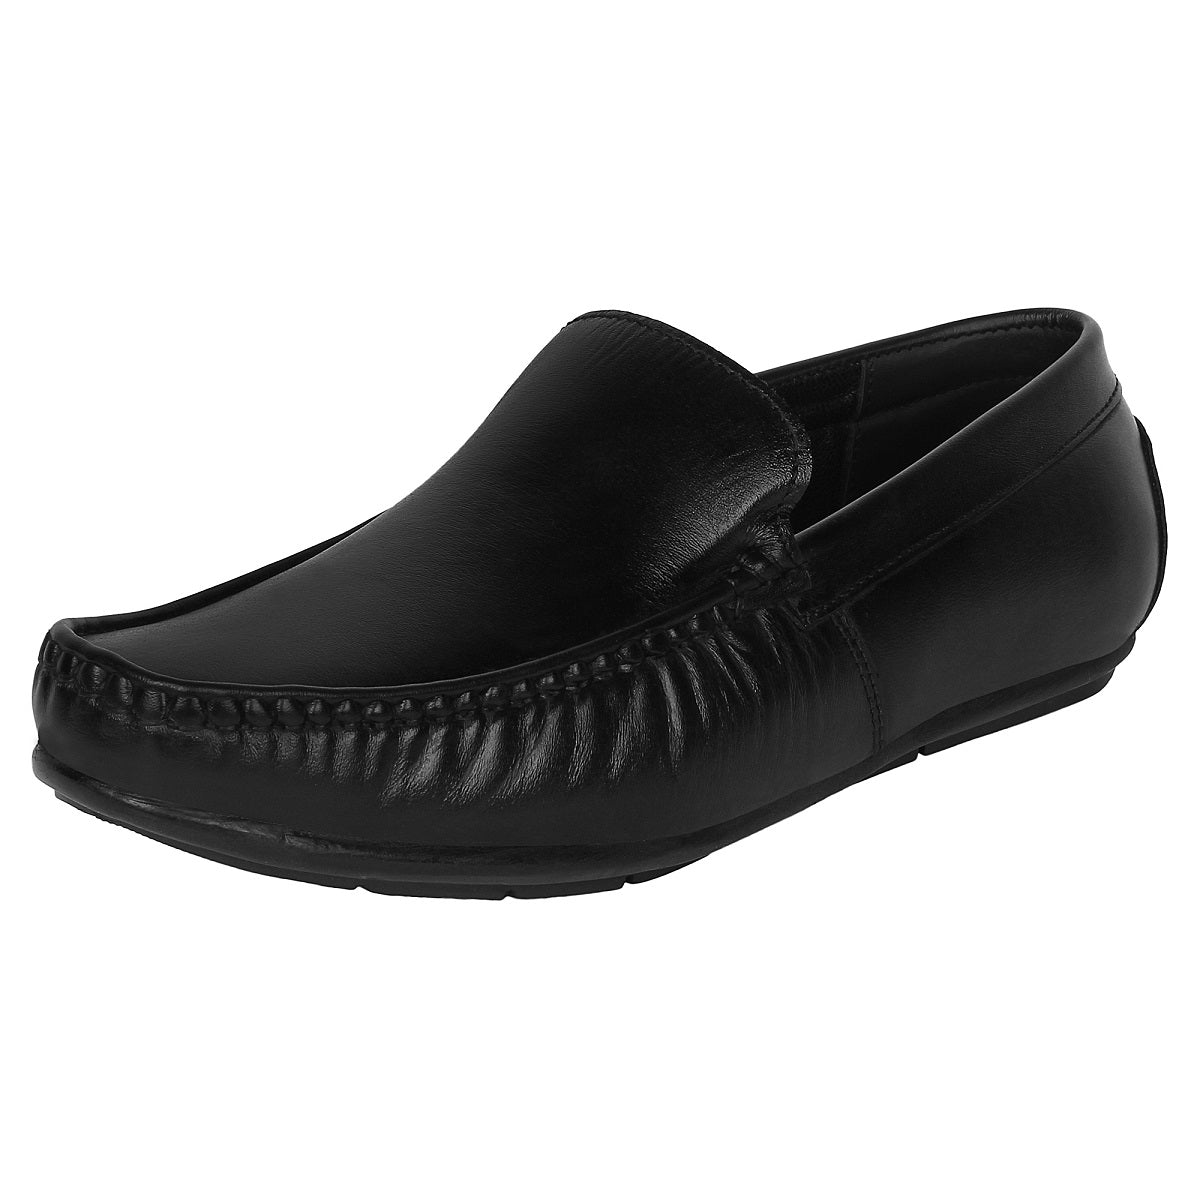 Leather Loafers for Men -Defective